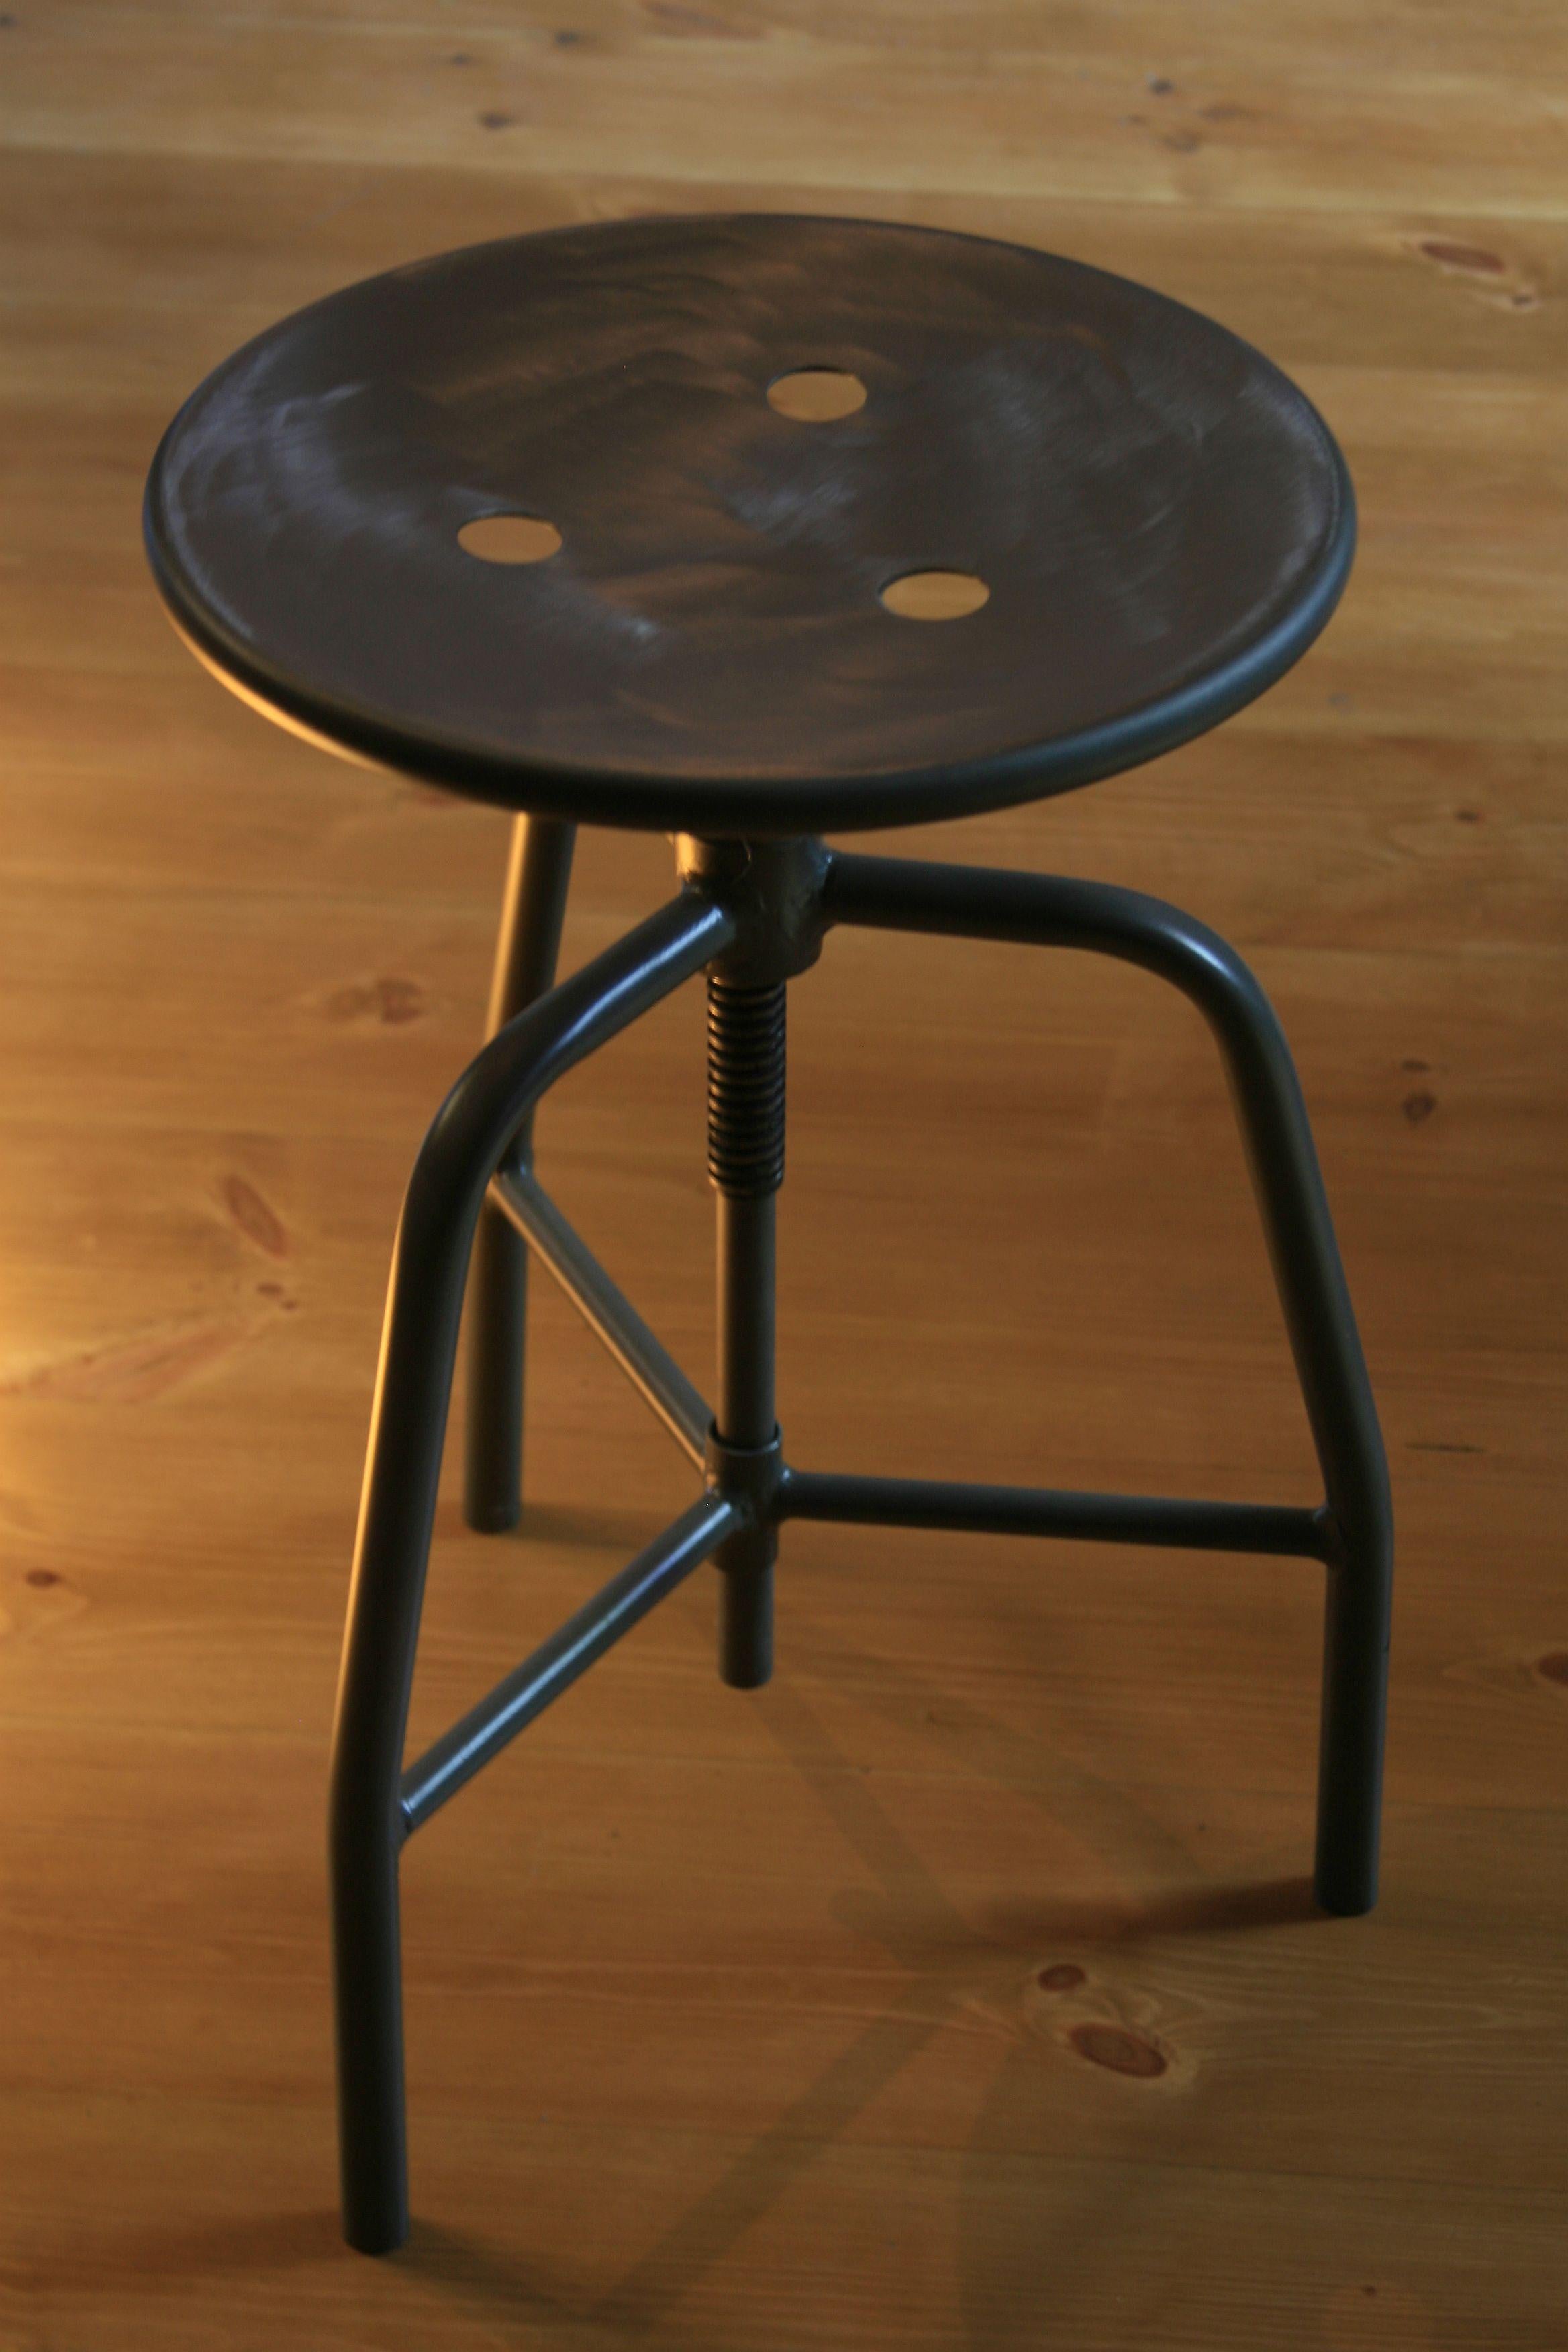 A classic swivel medical stool with adjustable seat height.
Production: 1960s.

Construction:
Welded steel construction, pressed sheet steel seat, height adjustment - threaded seat post.

Range of renovation:
The stool was sandblasted, the upper